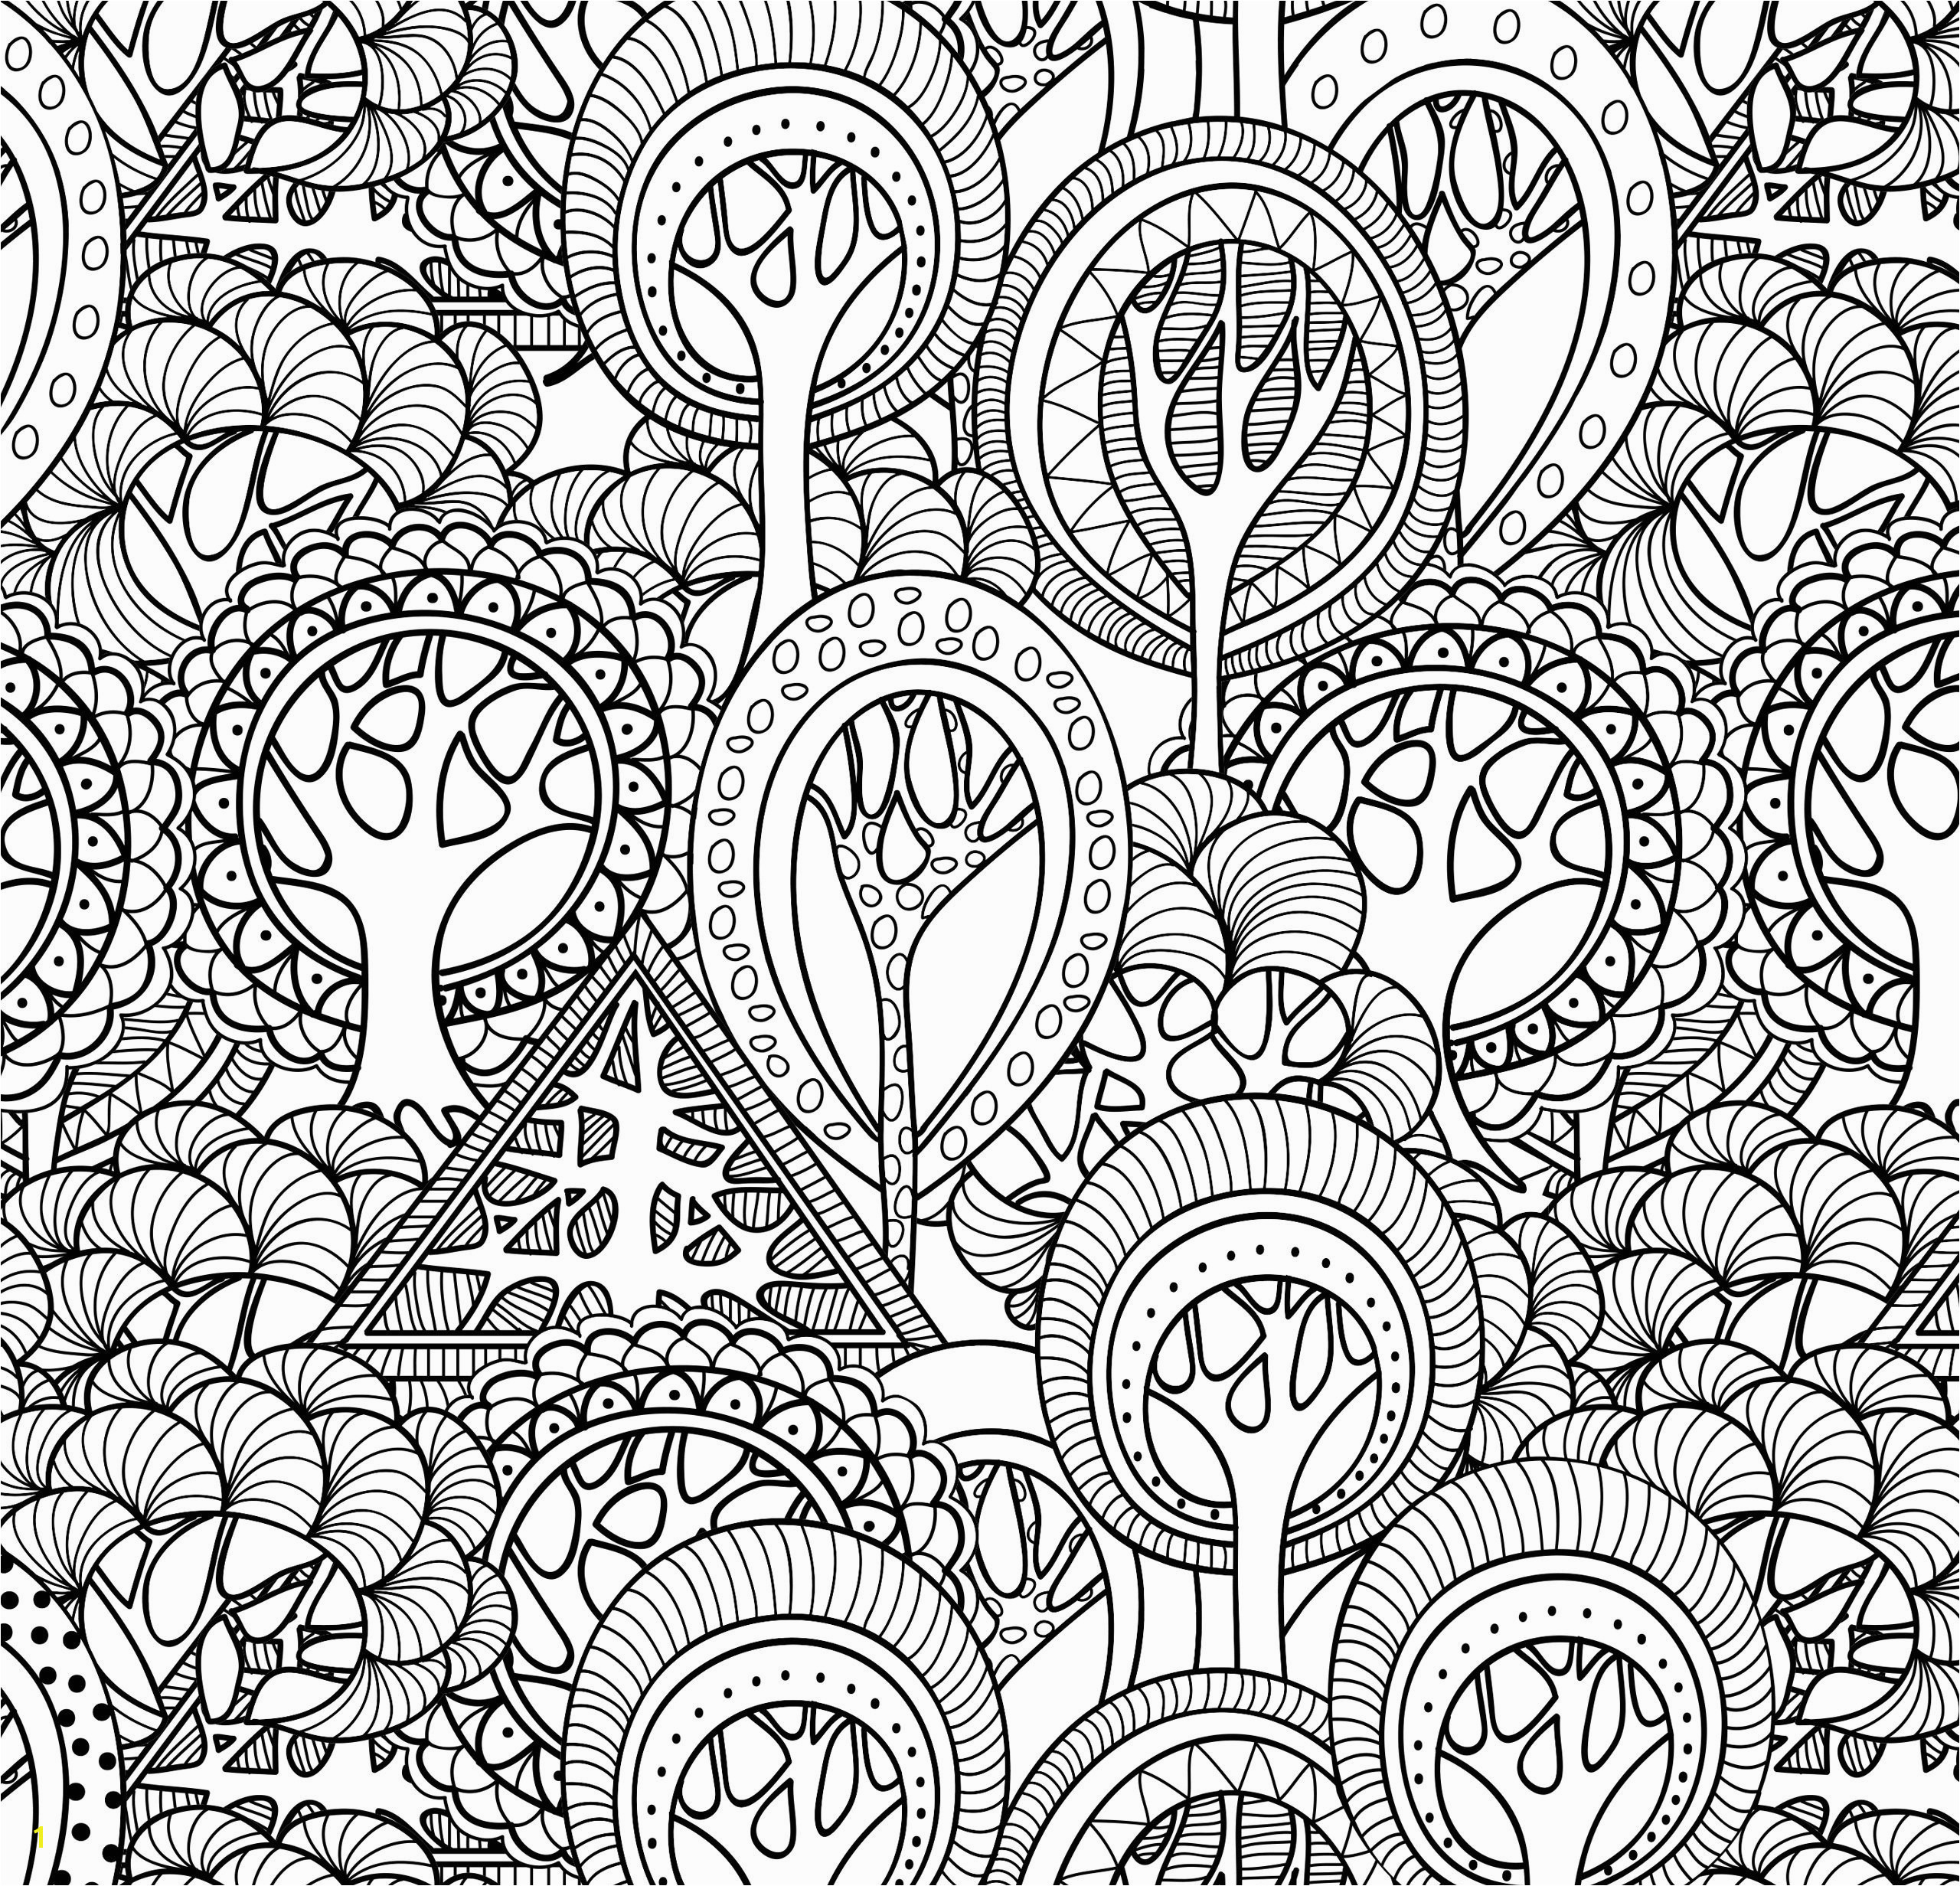 Downloadable Adult Coloring Books Elegant Awesome Printable Coloring Pages for Adults Unique Cool Od Dog –